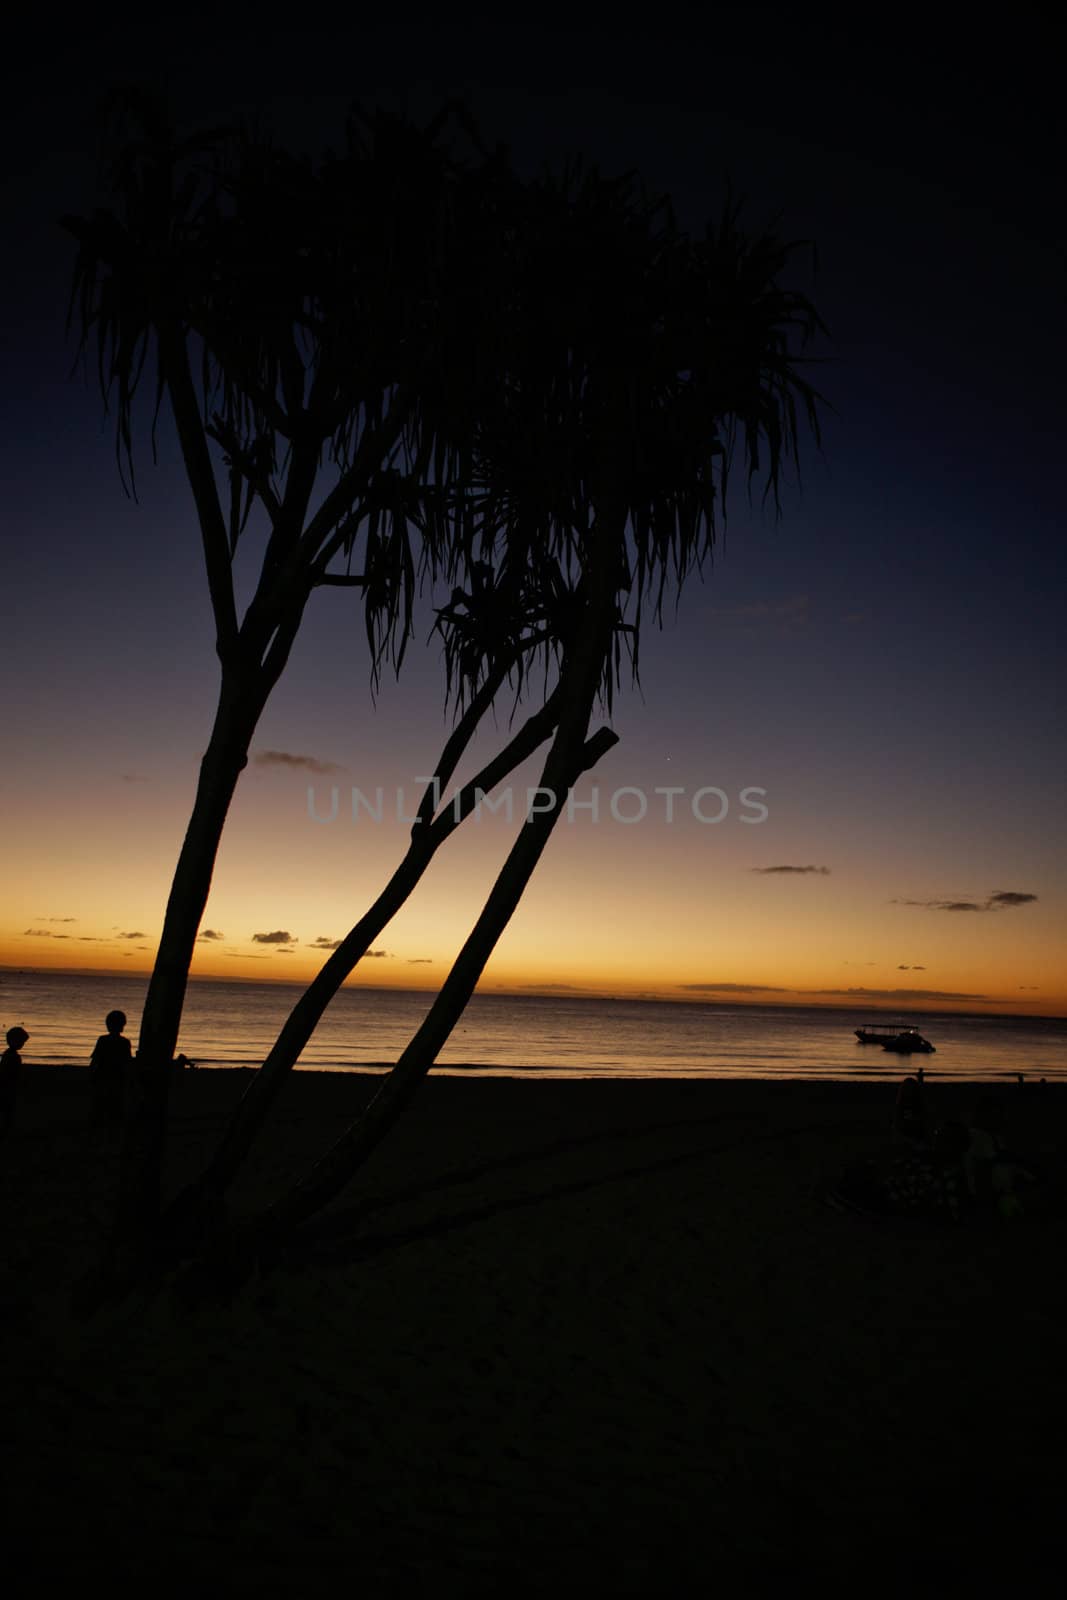 Colourful tropical ocean sunset with people and trees silhouetted on the shore against its golden glow